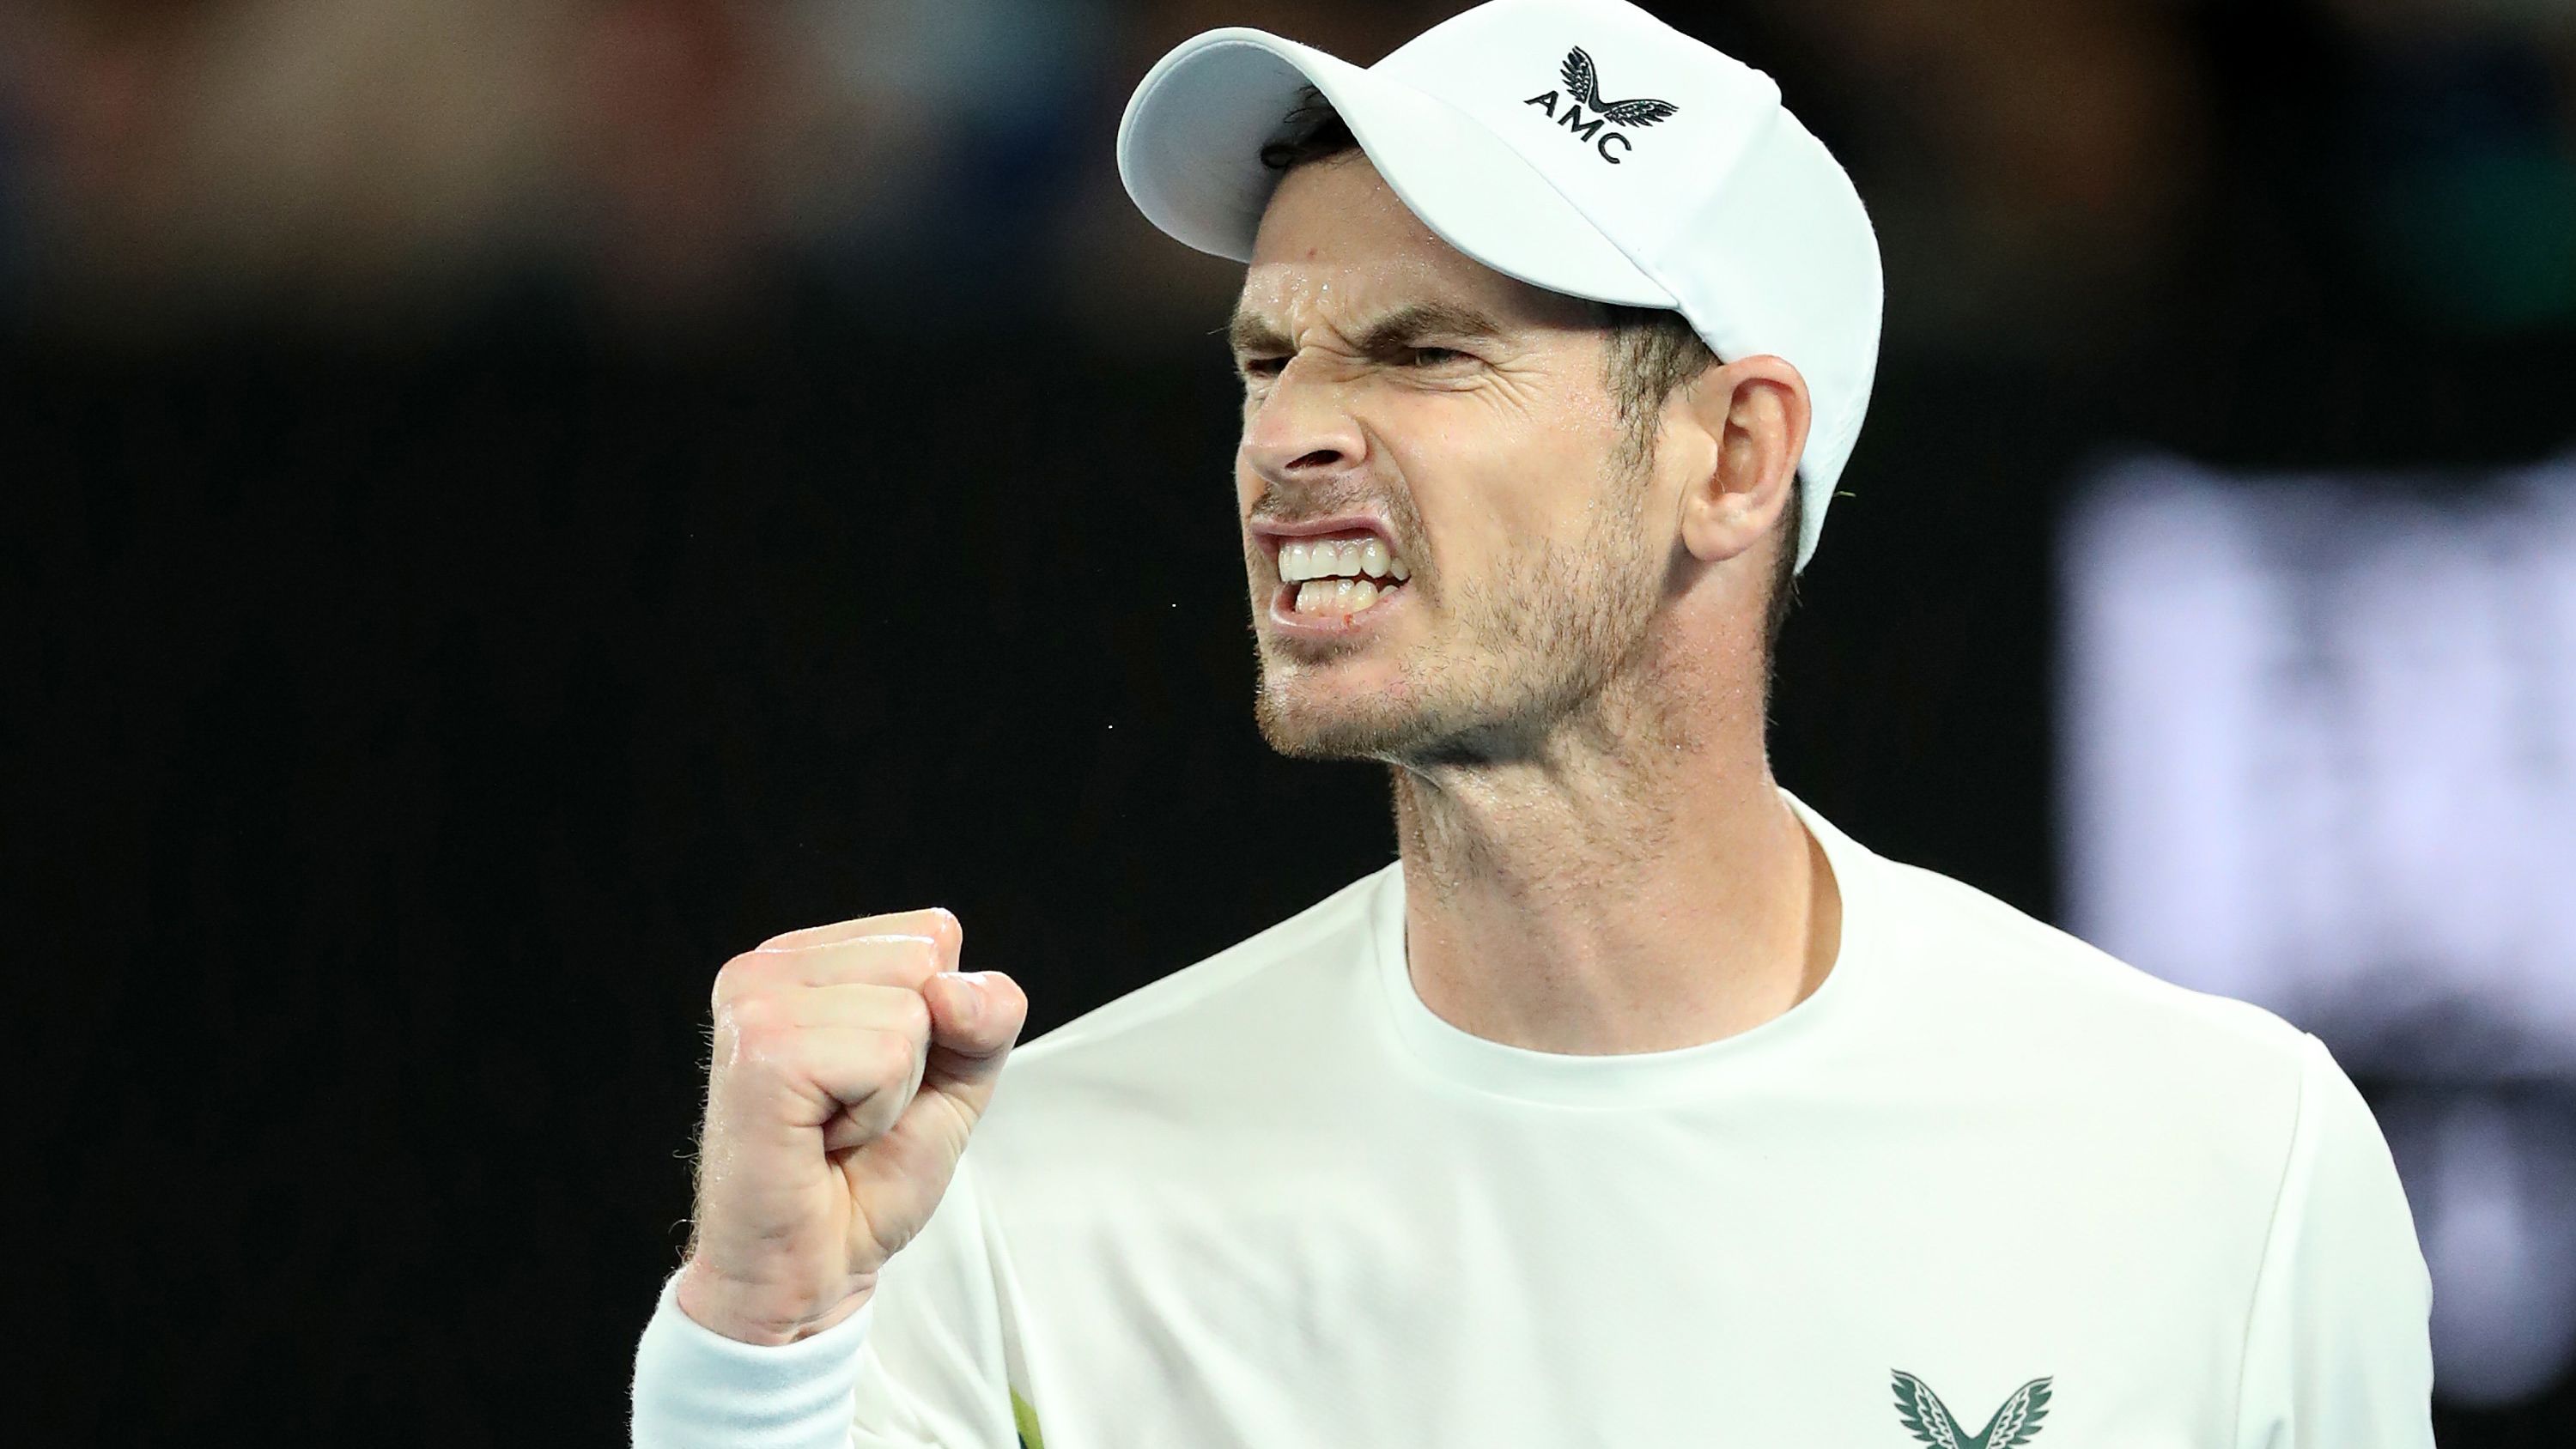 MELBOURNE, AUSTRALIA - JANUARY 17: Andy Murray of Great Britain reacts in their round one singles match against Matteo Berrettini of Italy during day two of the 2023 Australian Open at Melbourne Park on January 17, 2023 in Melbourne, Australia. (Photo by Kelly Defina/Getty Images)